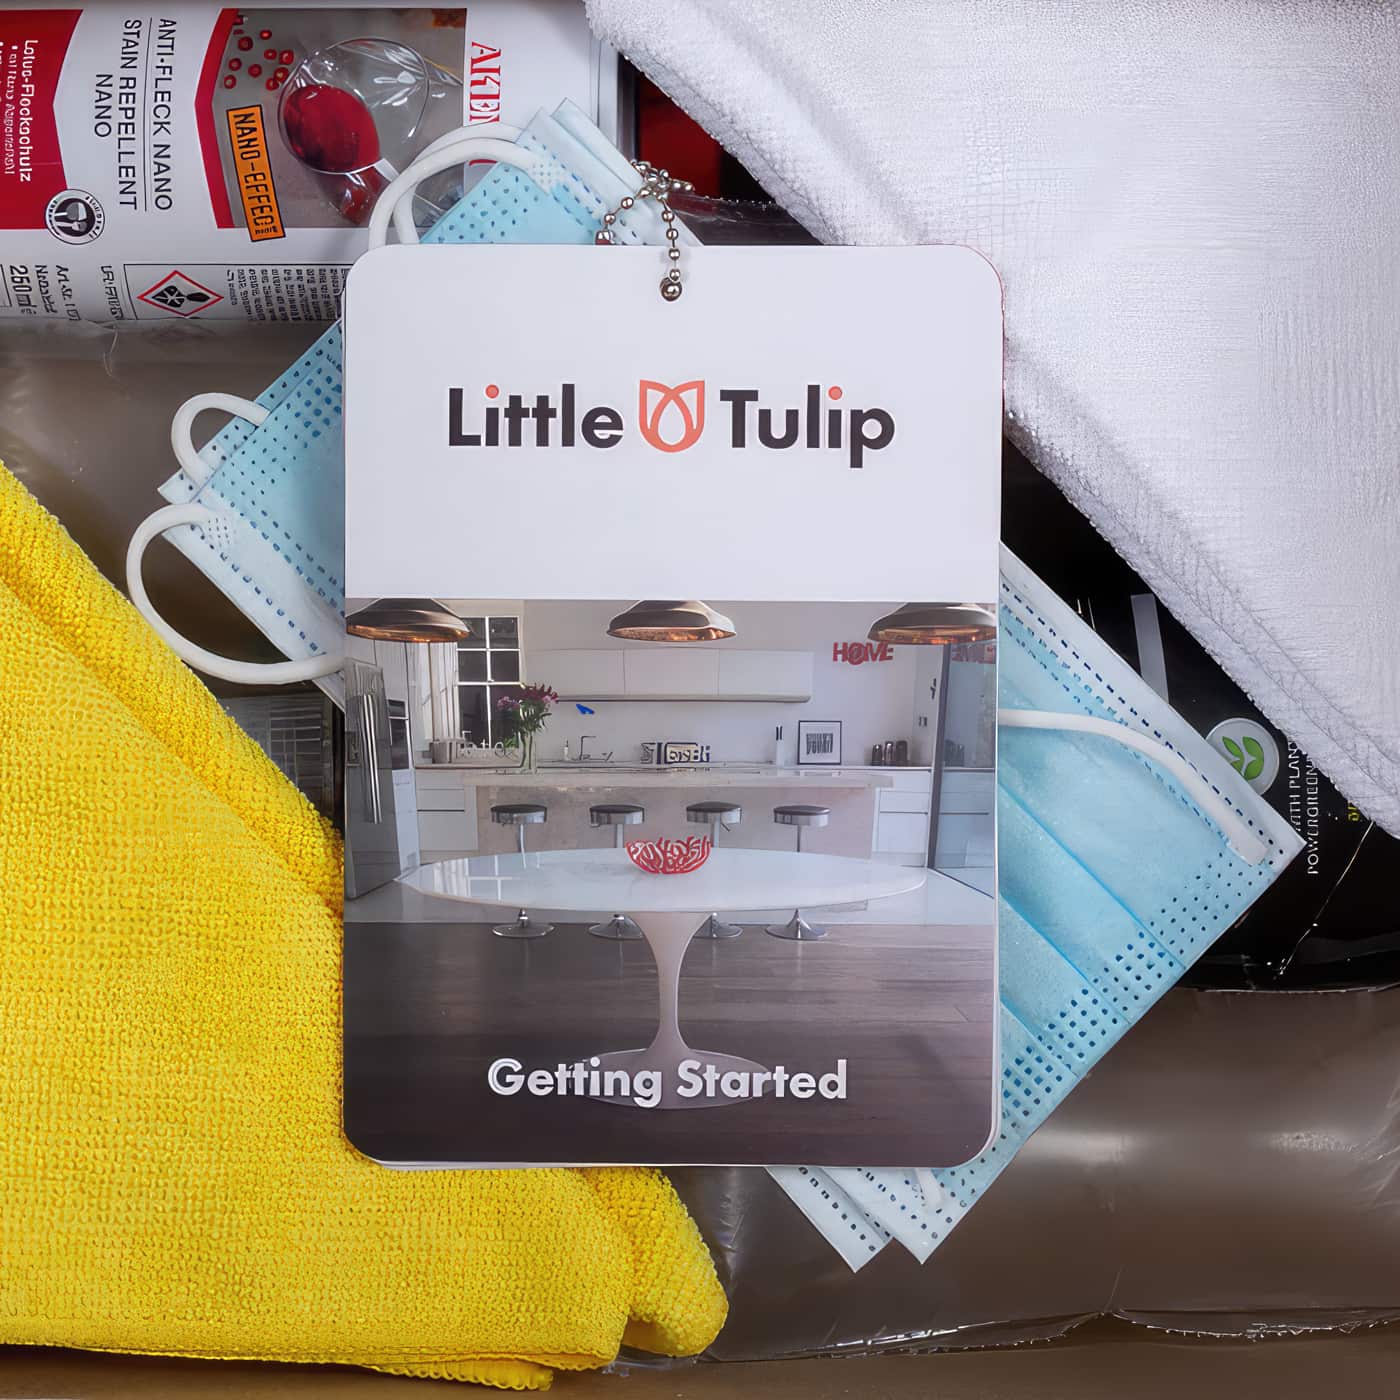 Each Little Tulip Shop Care pack comes with handy colour printed flip book instructions to help you get the best out of your table for many years to come